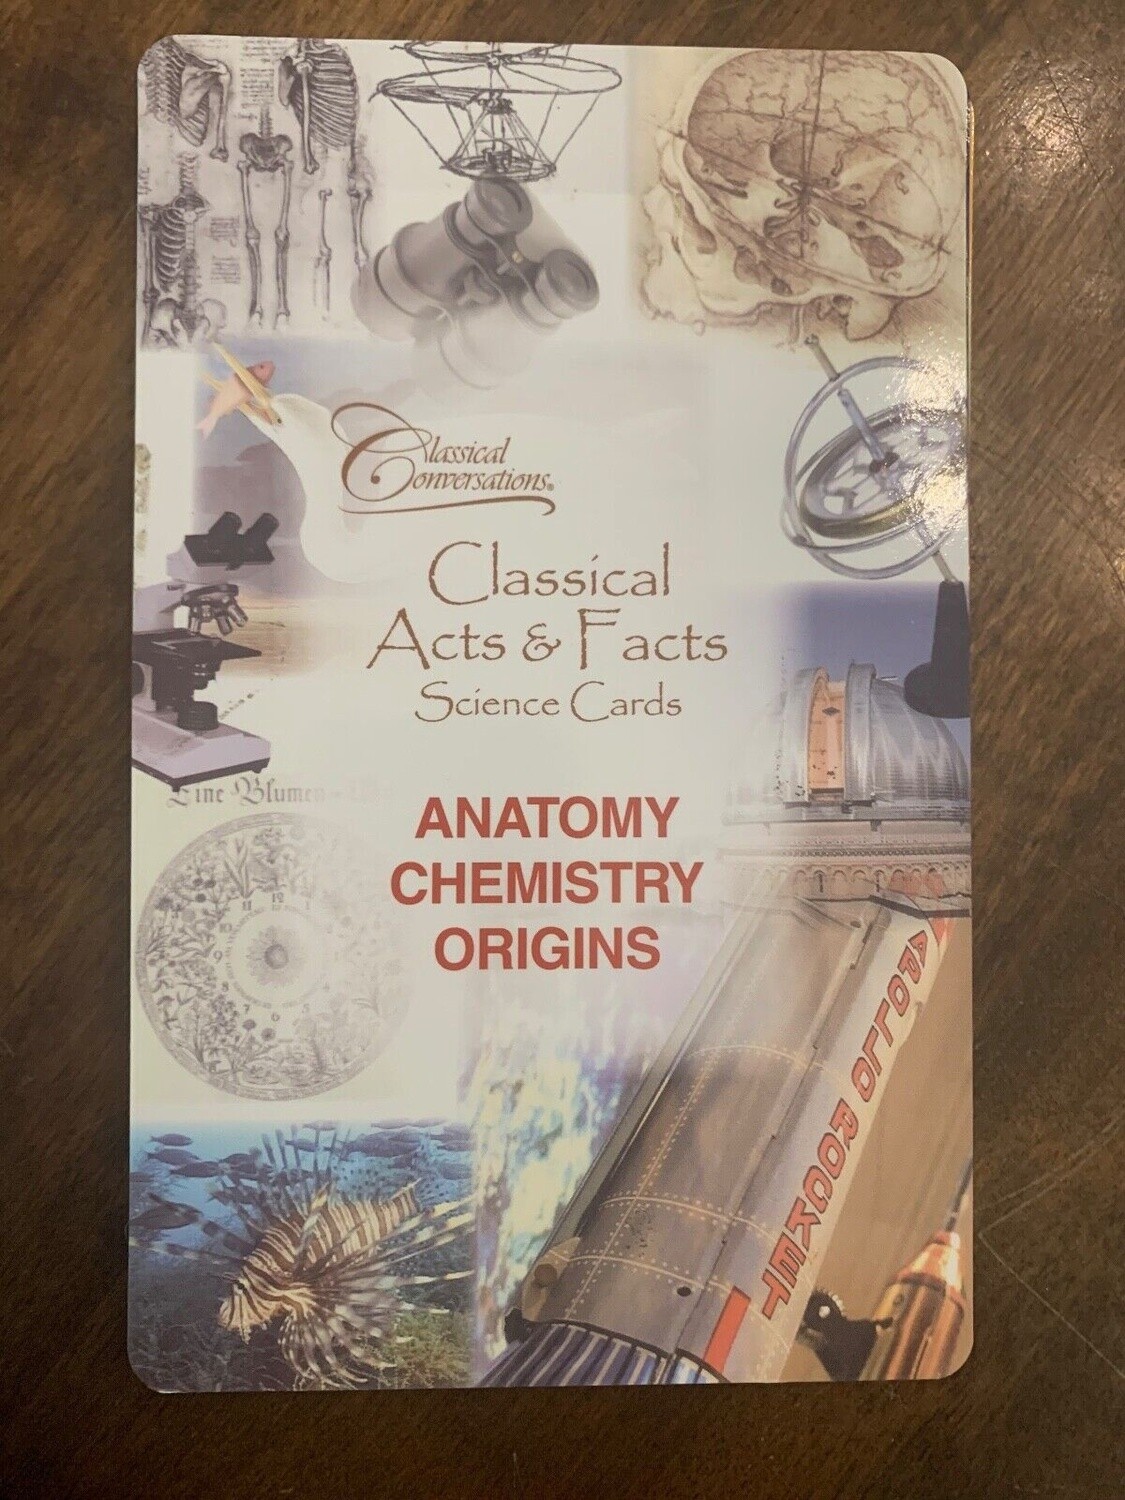 Used Classical Conversations Science Cards : Cycle 3 Anatomy Chemistry Origins